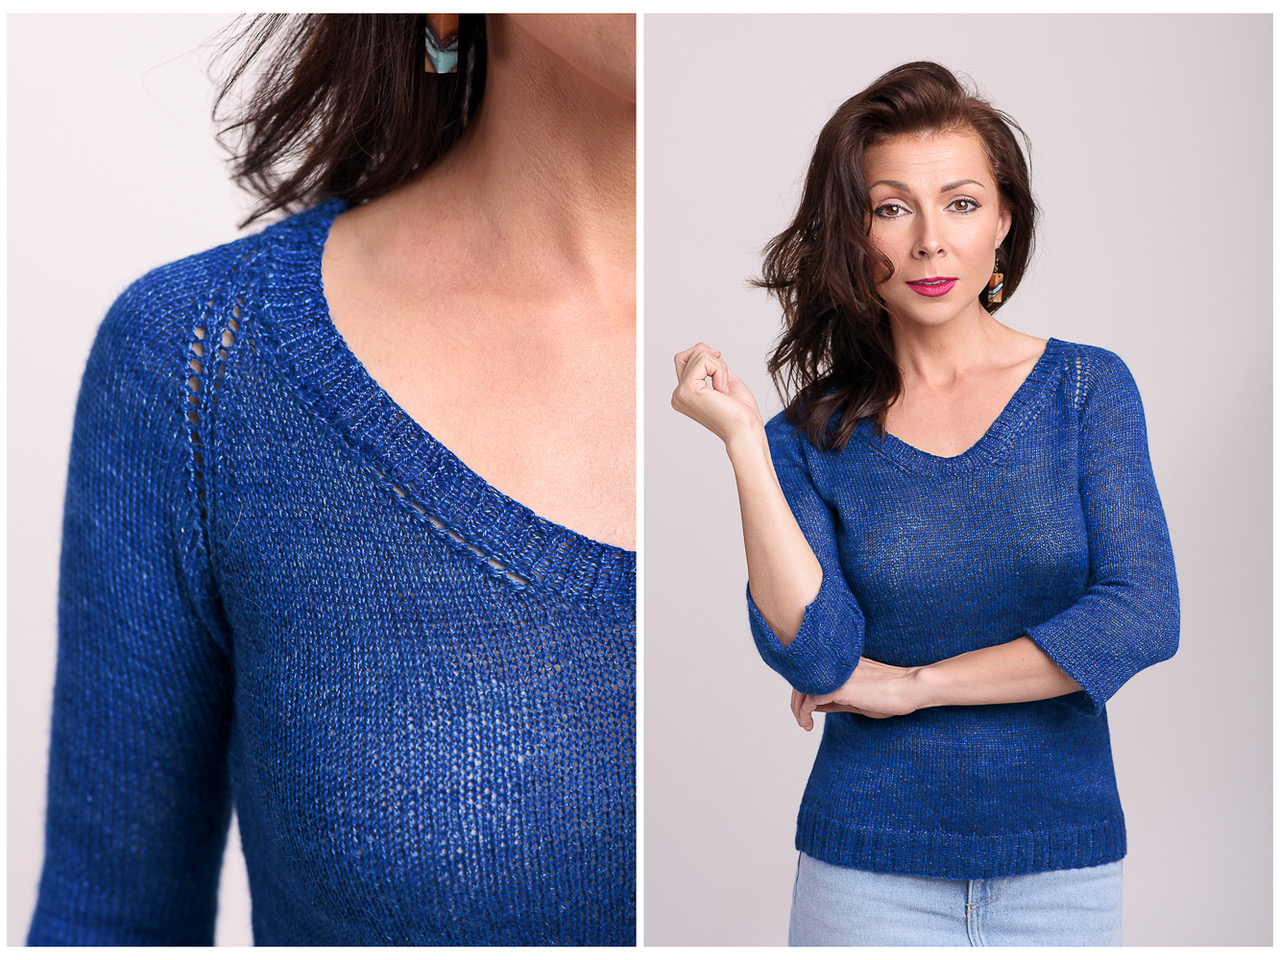 Sevenlace knitted sweater pullover pattern